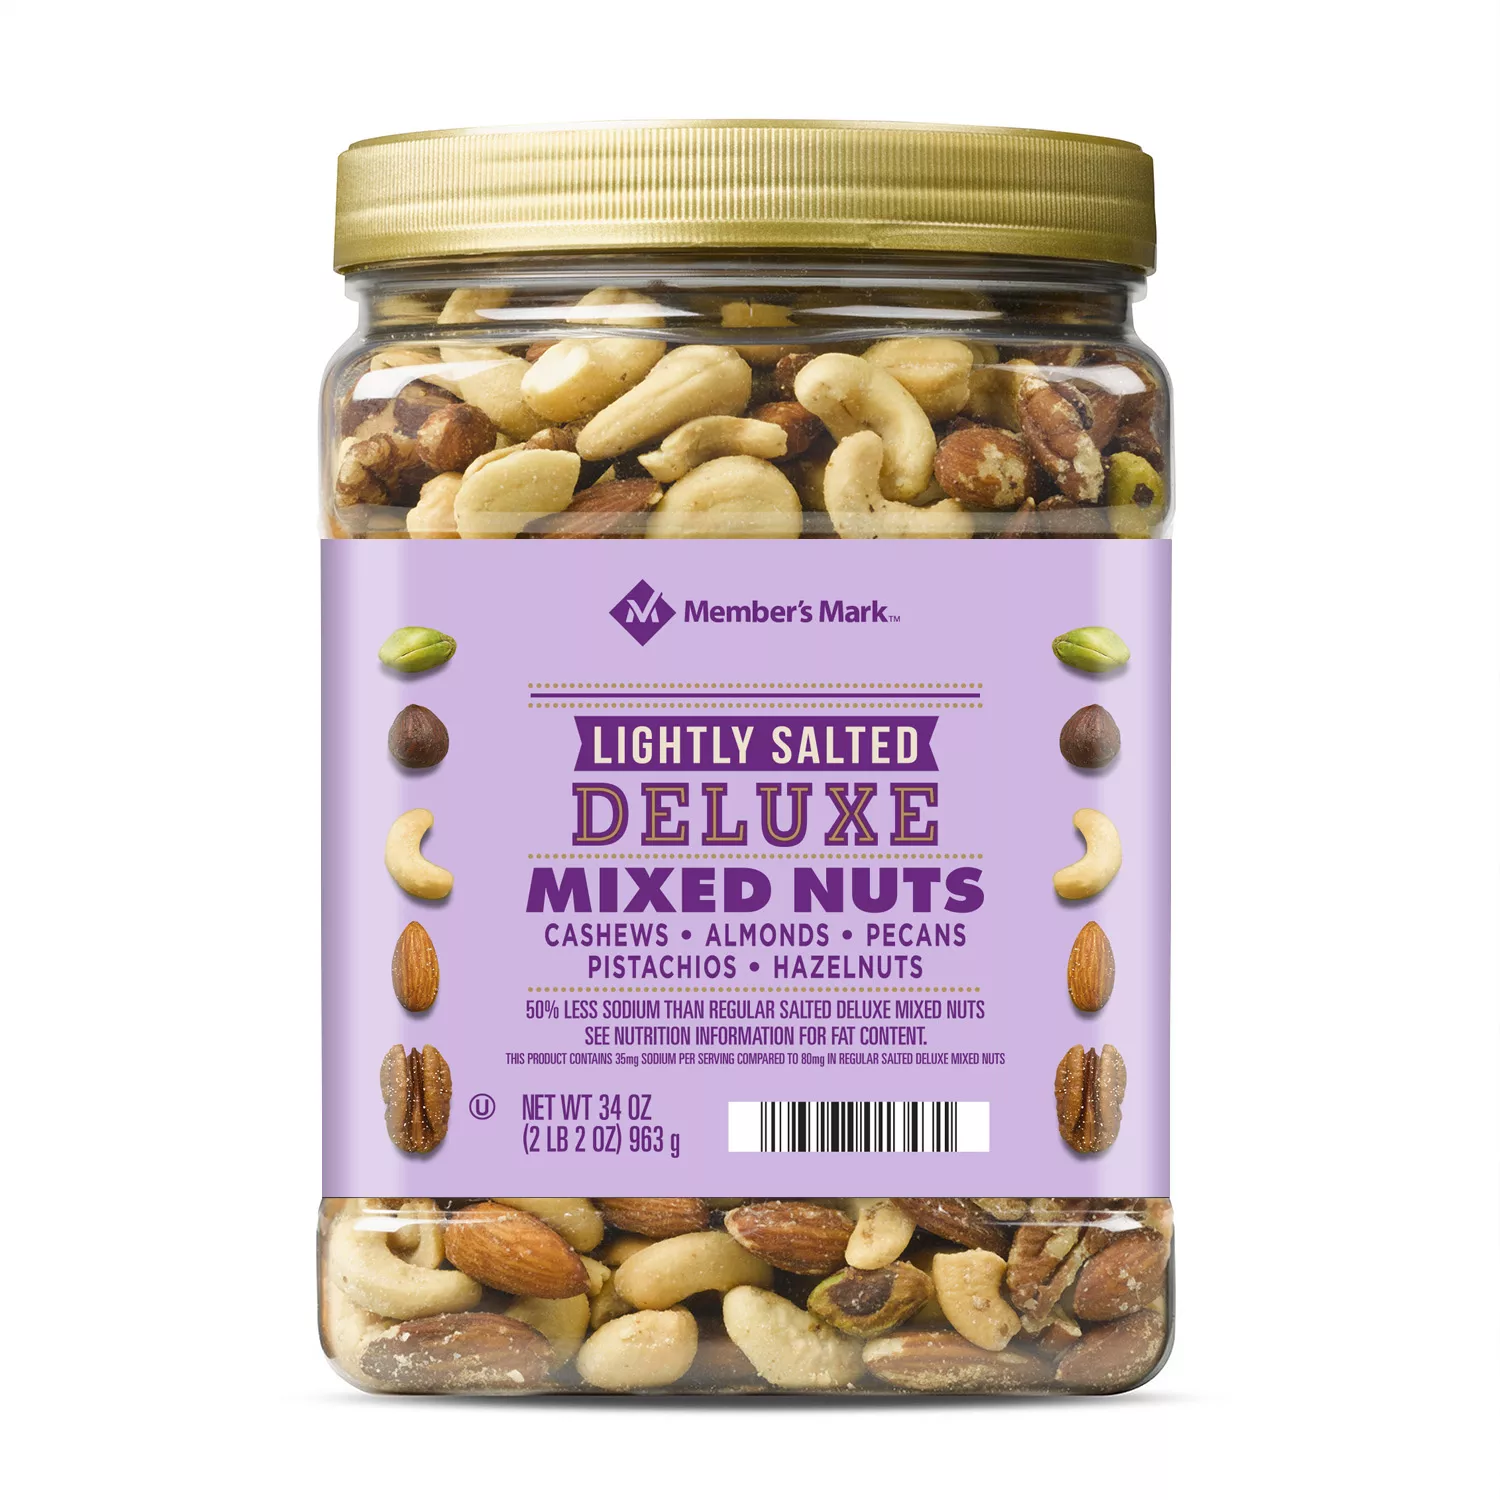 Member's Mark Lightly Salted Deluxe Mixed Nuts